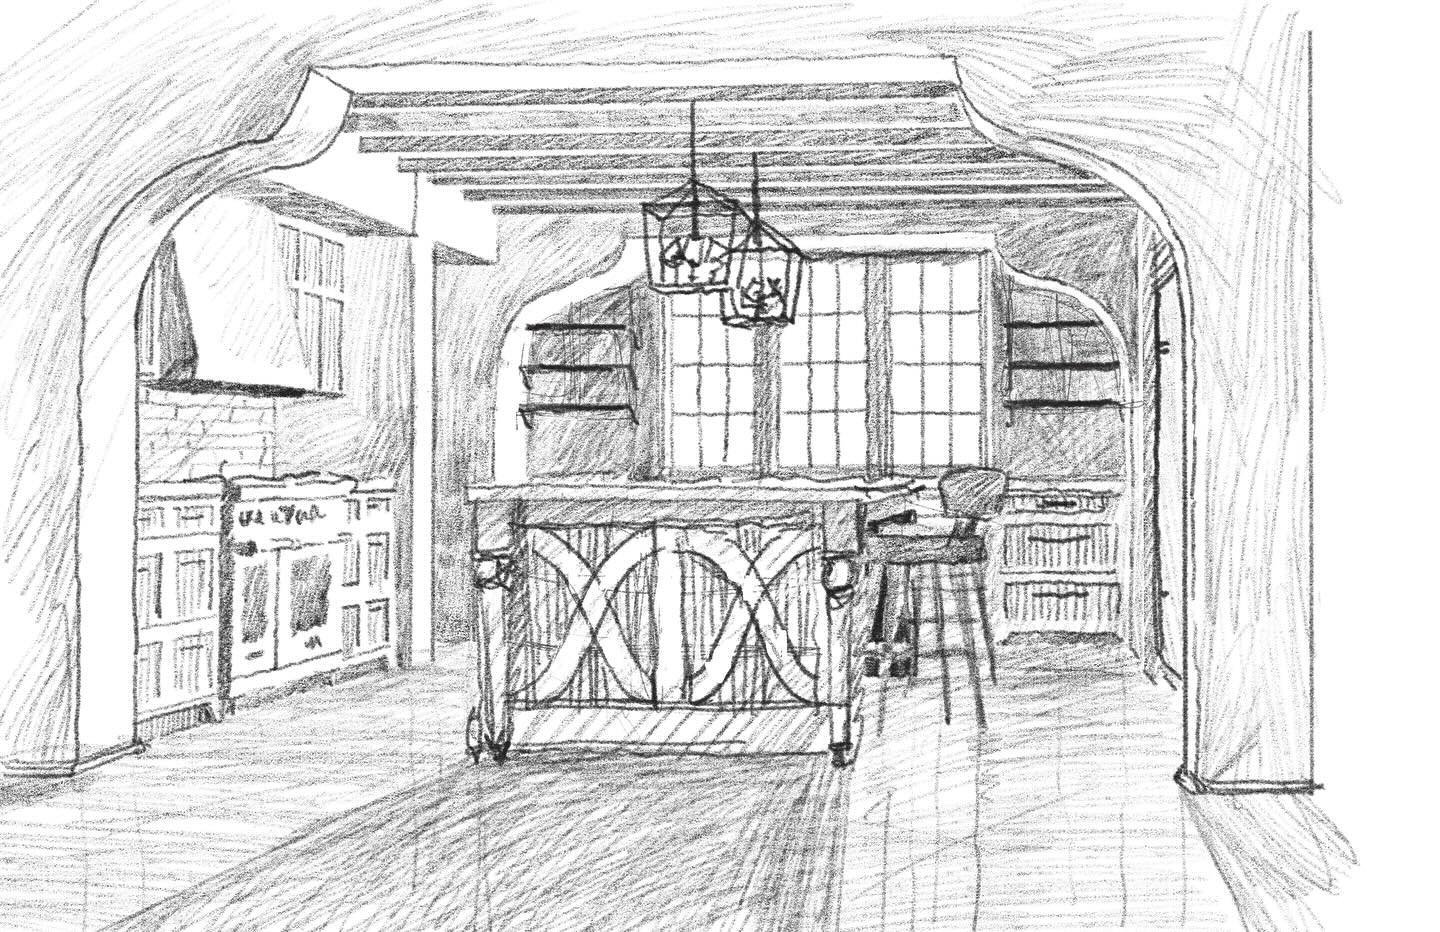 A quick kitchen concept sketch from an unrealized project from a few years ago. @carlislemoorearchitects #renovation
&darr; 
&darr;
&darr;
#architect #TraditionalDesign #ArchitectDesigned #TraditionalHouse #HomeInspiration #Homeinspo #HouseDesign #Tr